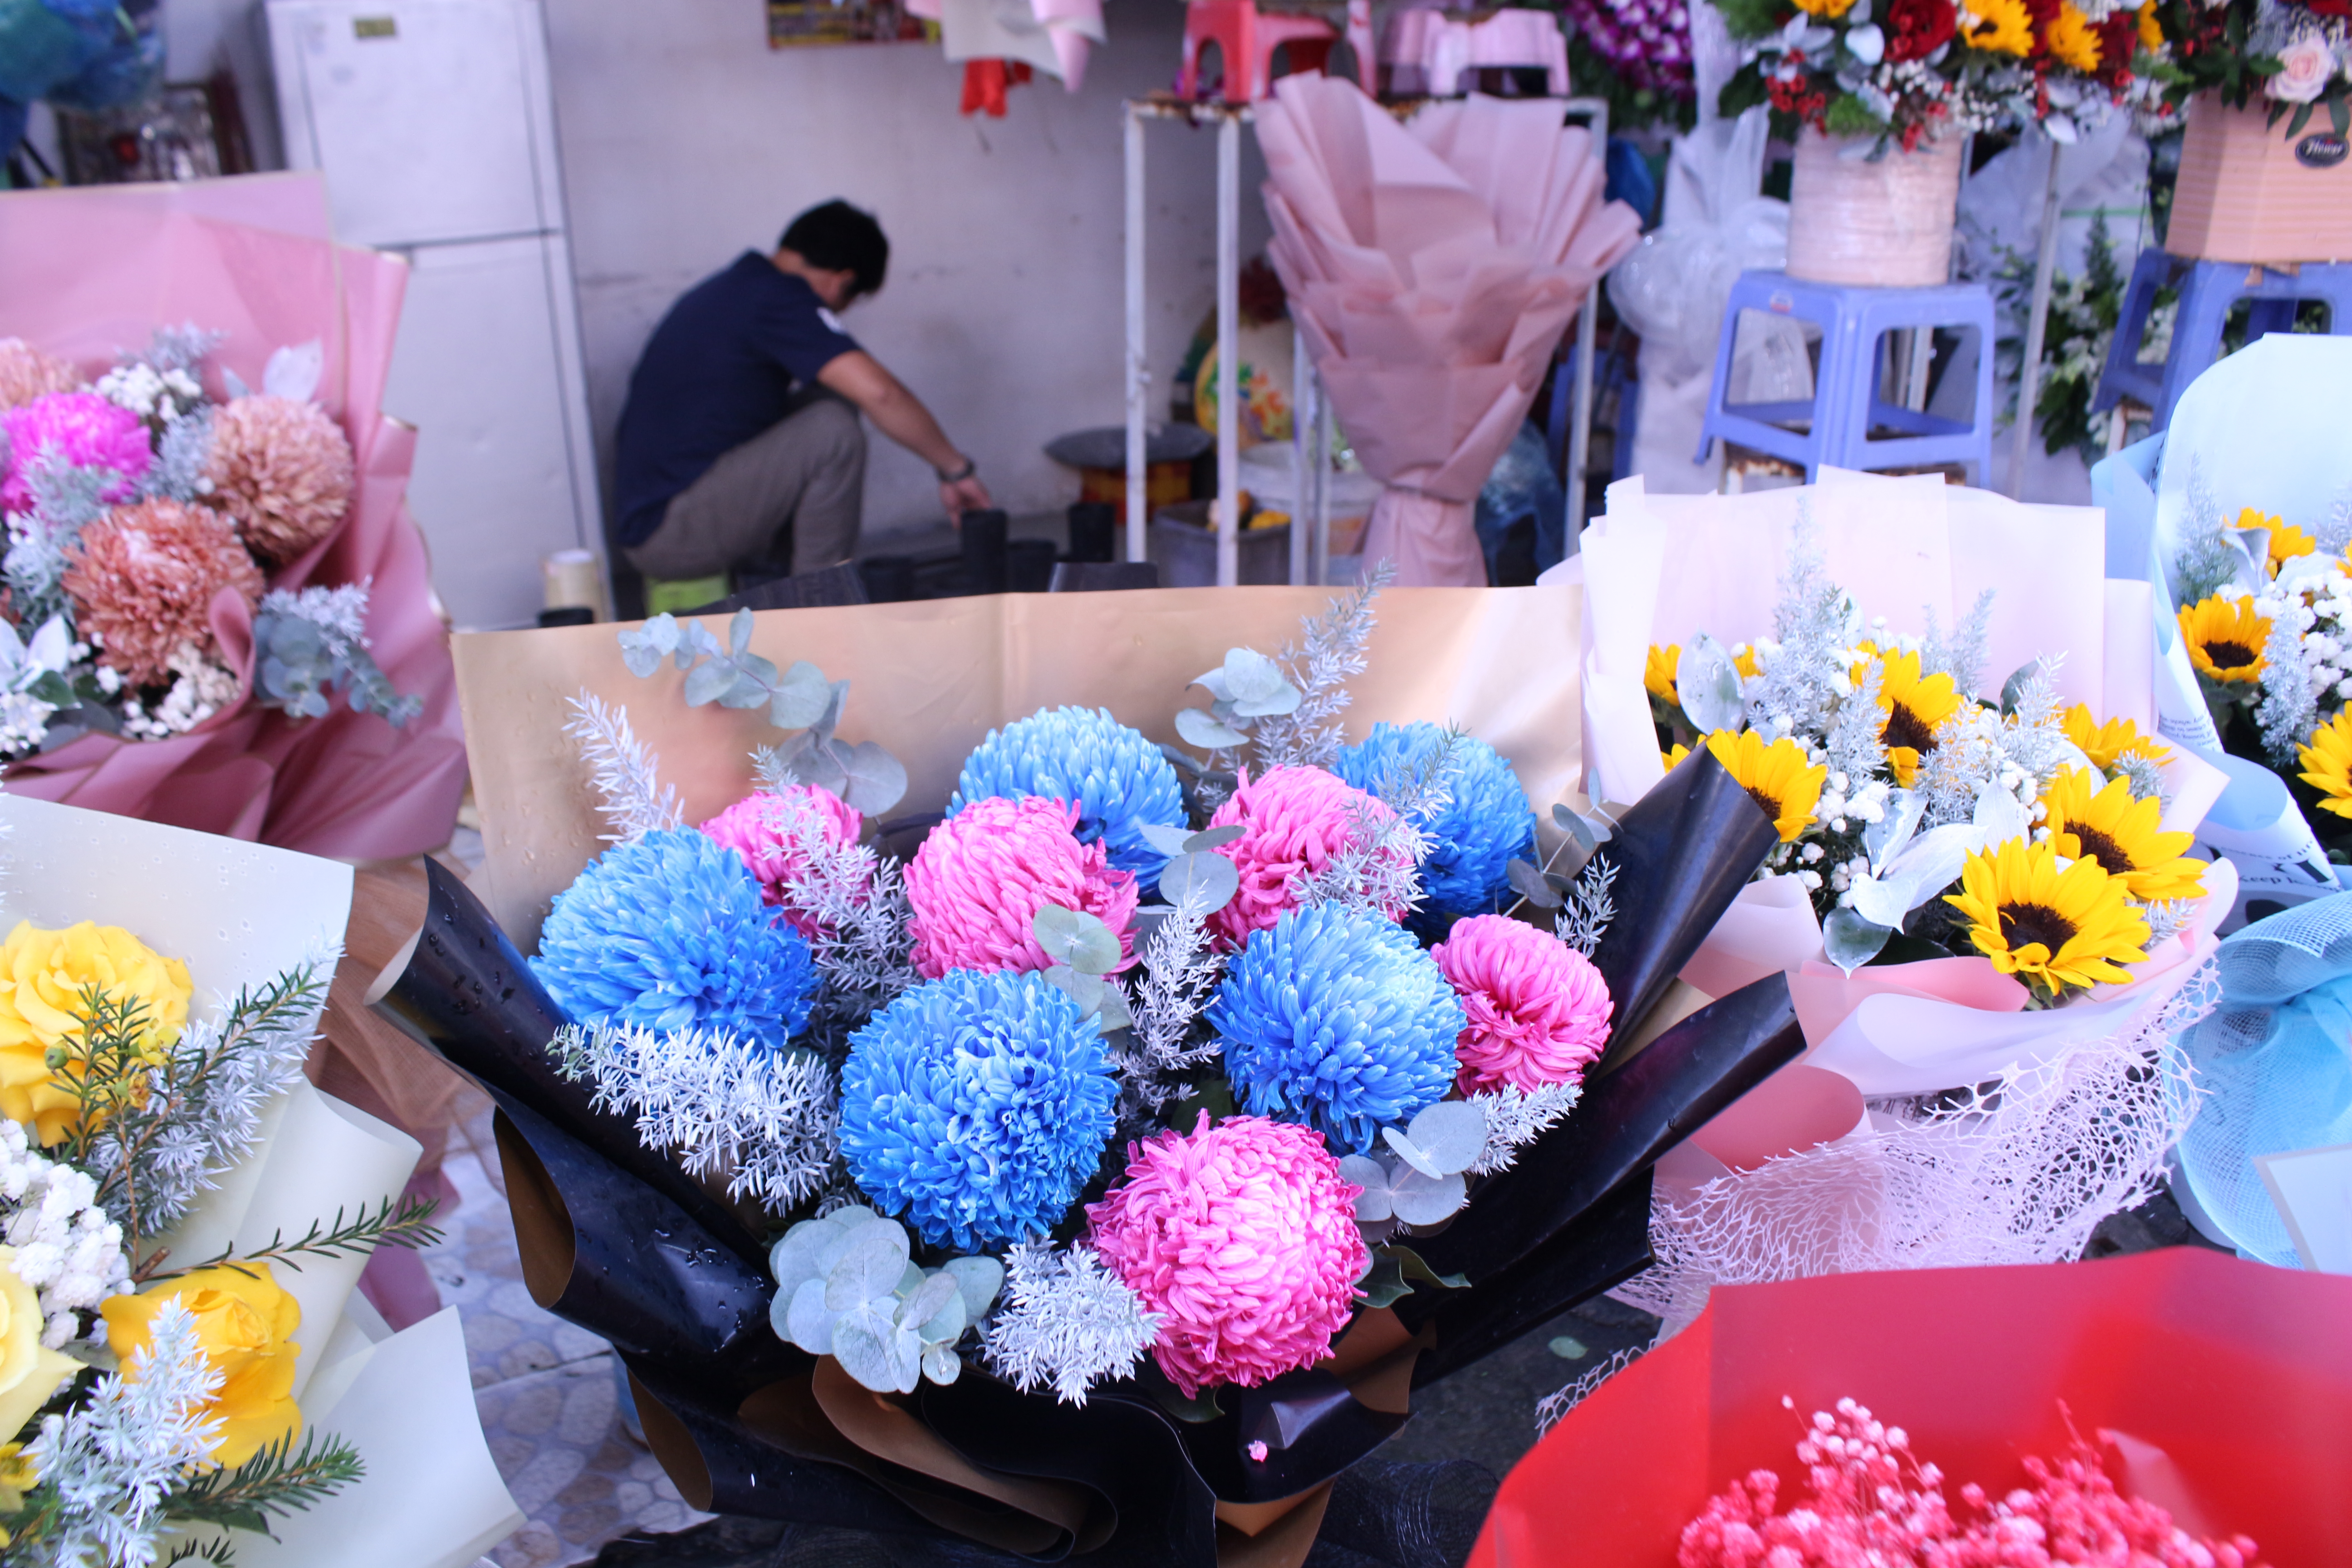 A bouquet of flowers is sold at Ho Thi Ky Market in District 10, Ho Chi Minh City. Photo: Ray Kuschert / Tuoi Tre News